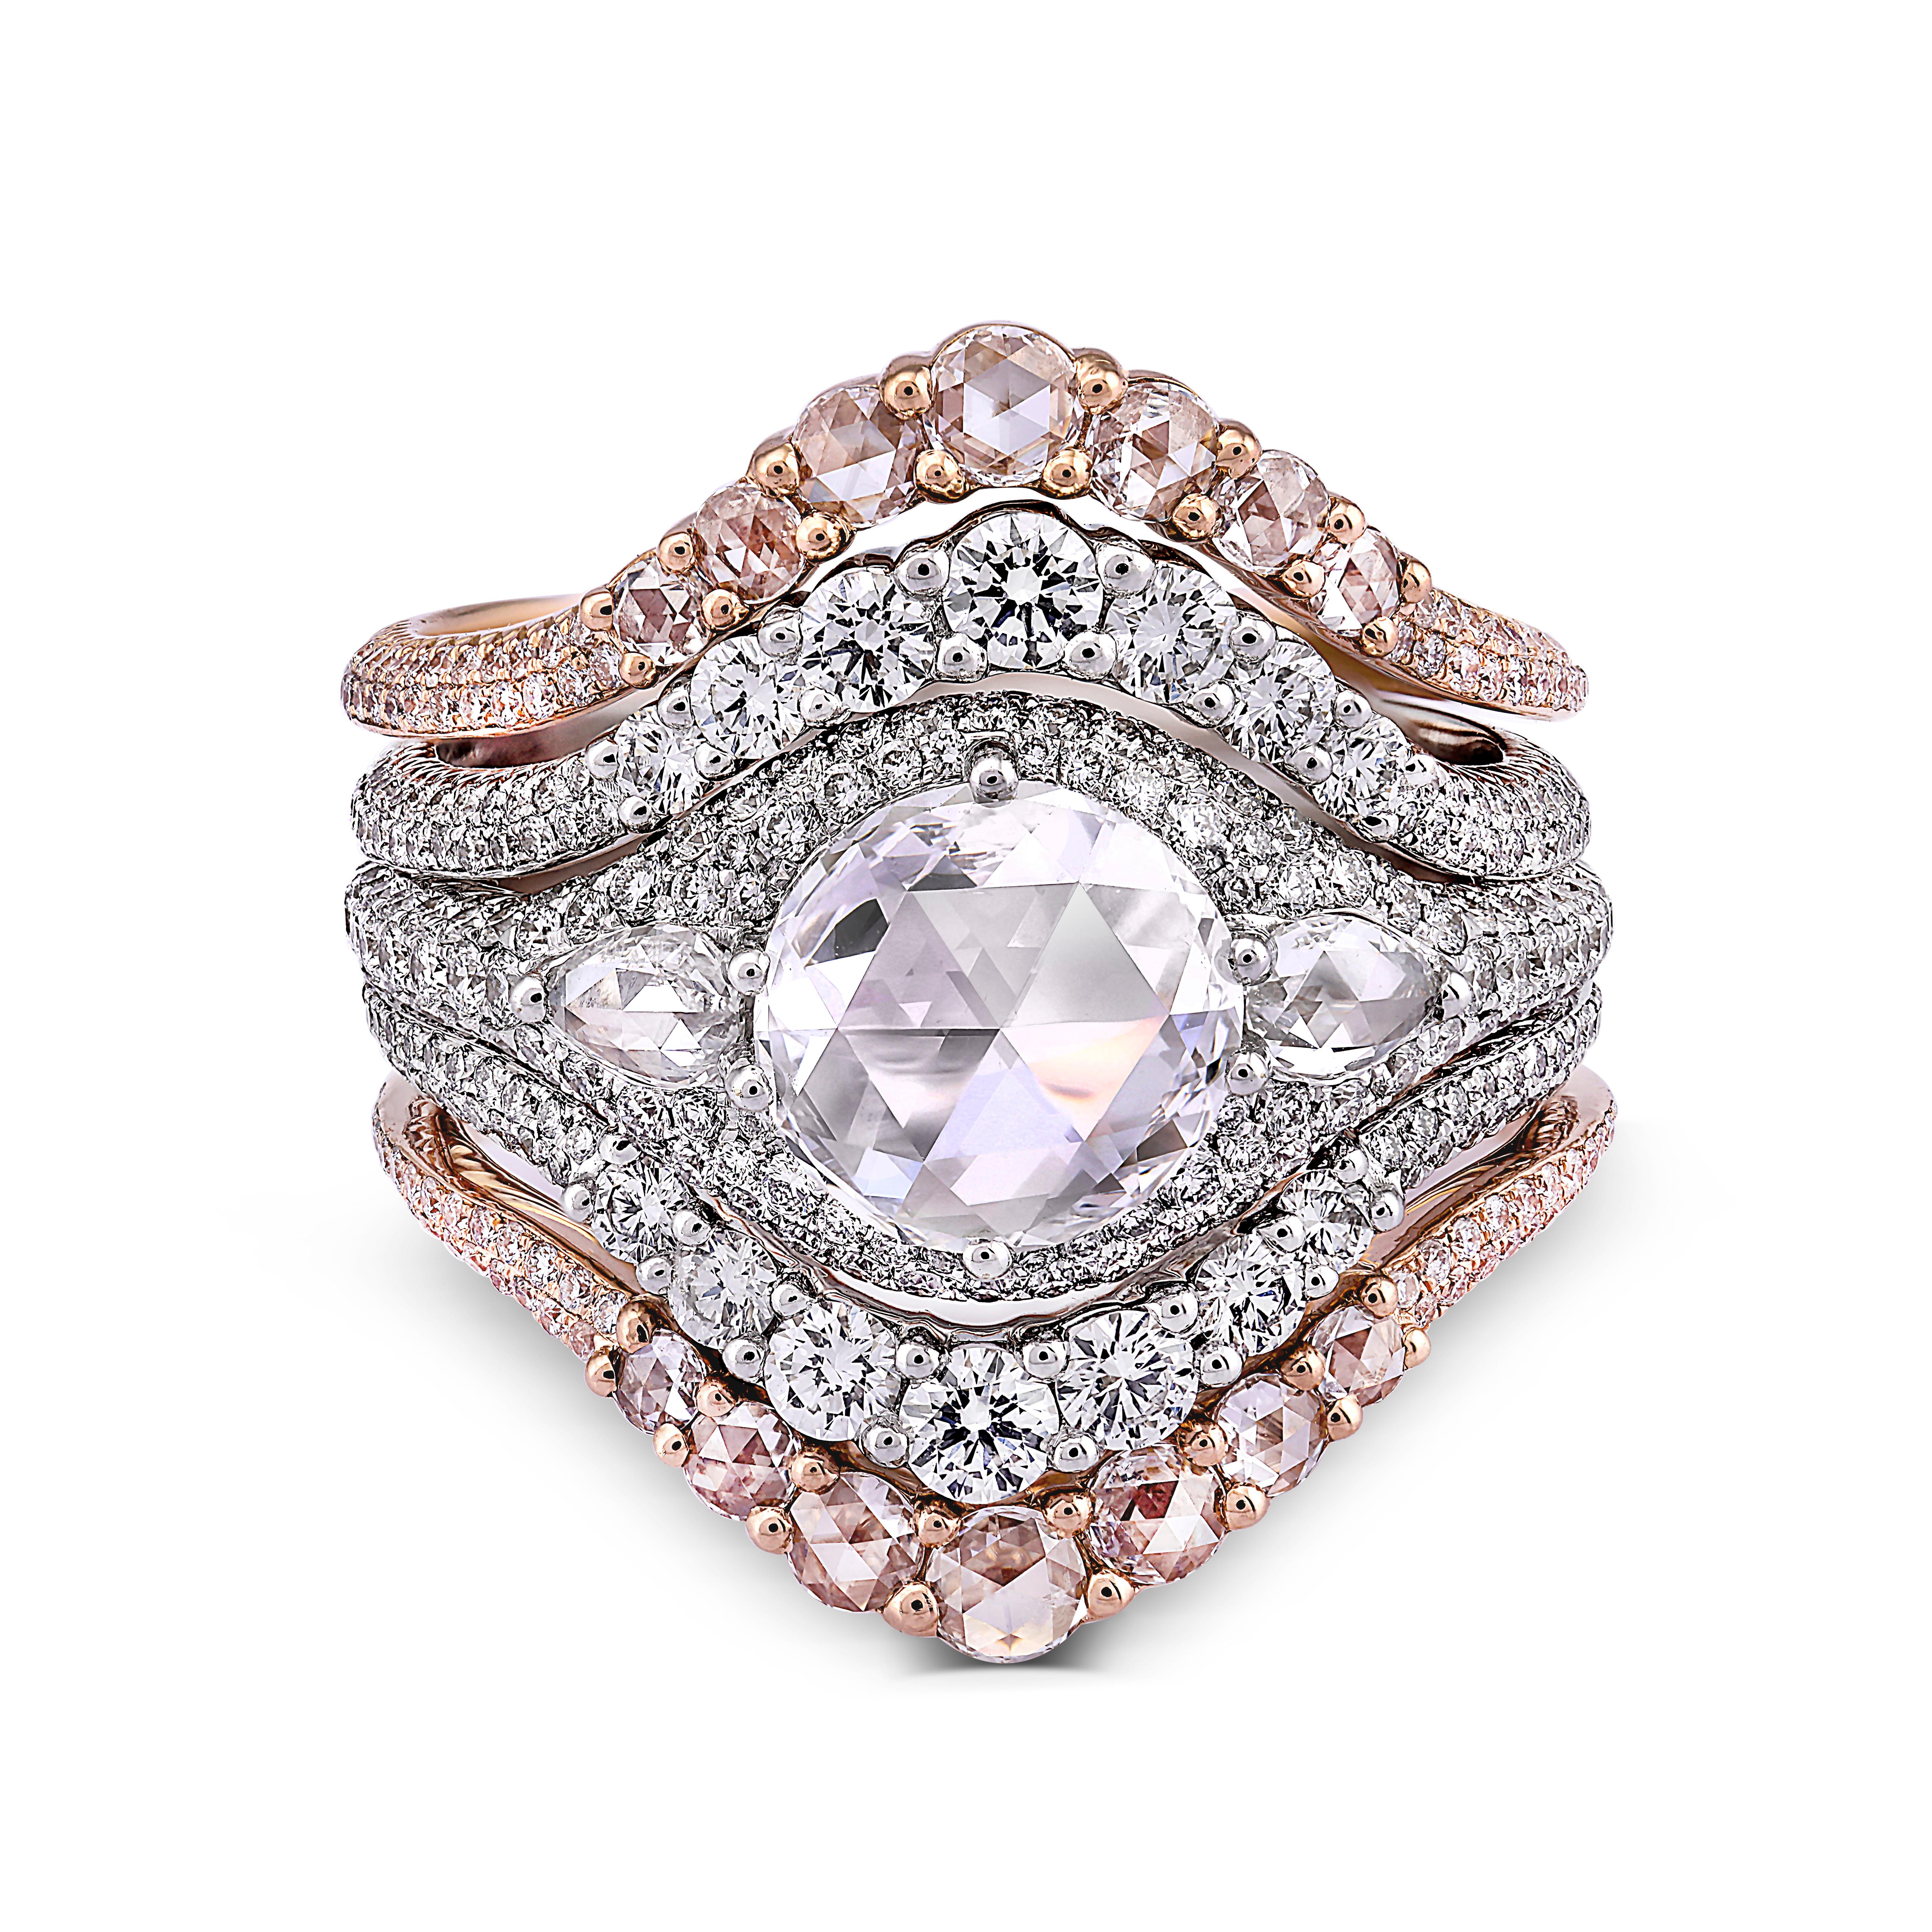 A hypnotic combination of rose and white gold, wed to multitudes of diamonds, give rhythm to this playful design. The central ring is set with a 1.09ct rose cut diamond and finished with 389 pave set diamonds. The outer rose and white gold rings are